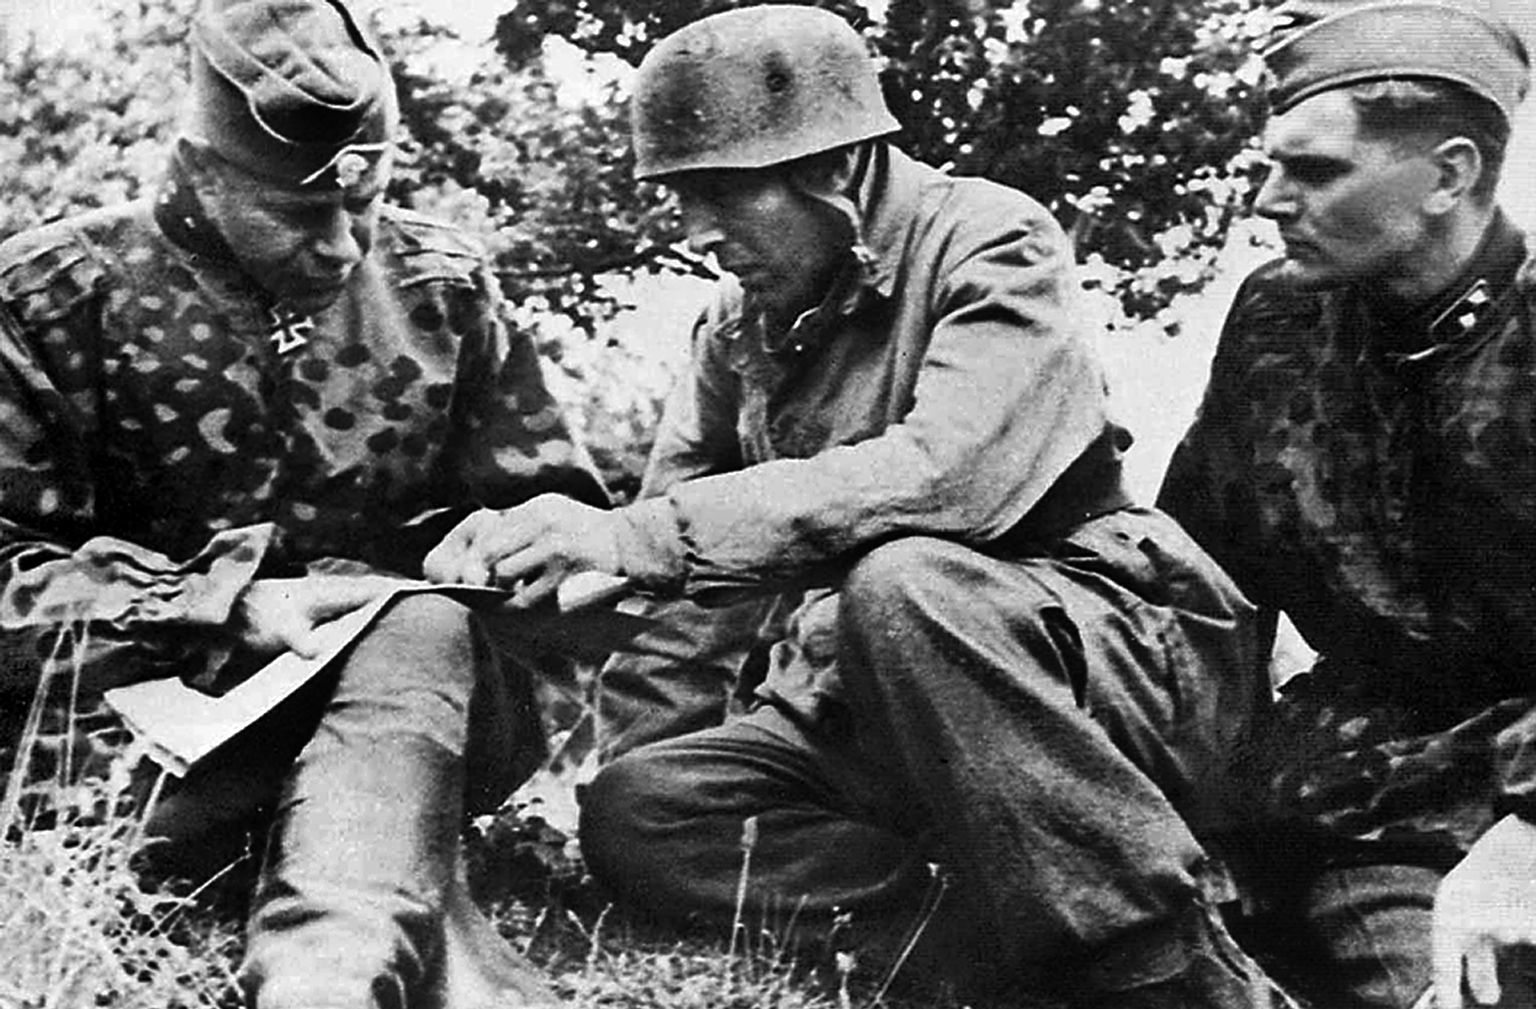 Werner Ostendorff (left), commander of the 17th SS Panzergrenadier Division, confers with Major Friedrich August Freiherr von der Heydte, the 506th PIR’s main opponent in Normandy. Paratrooper Art DiMarzio, 101st Airborne, recognized that these German troops were aggressive and not to be underestimated.